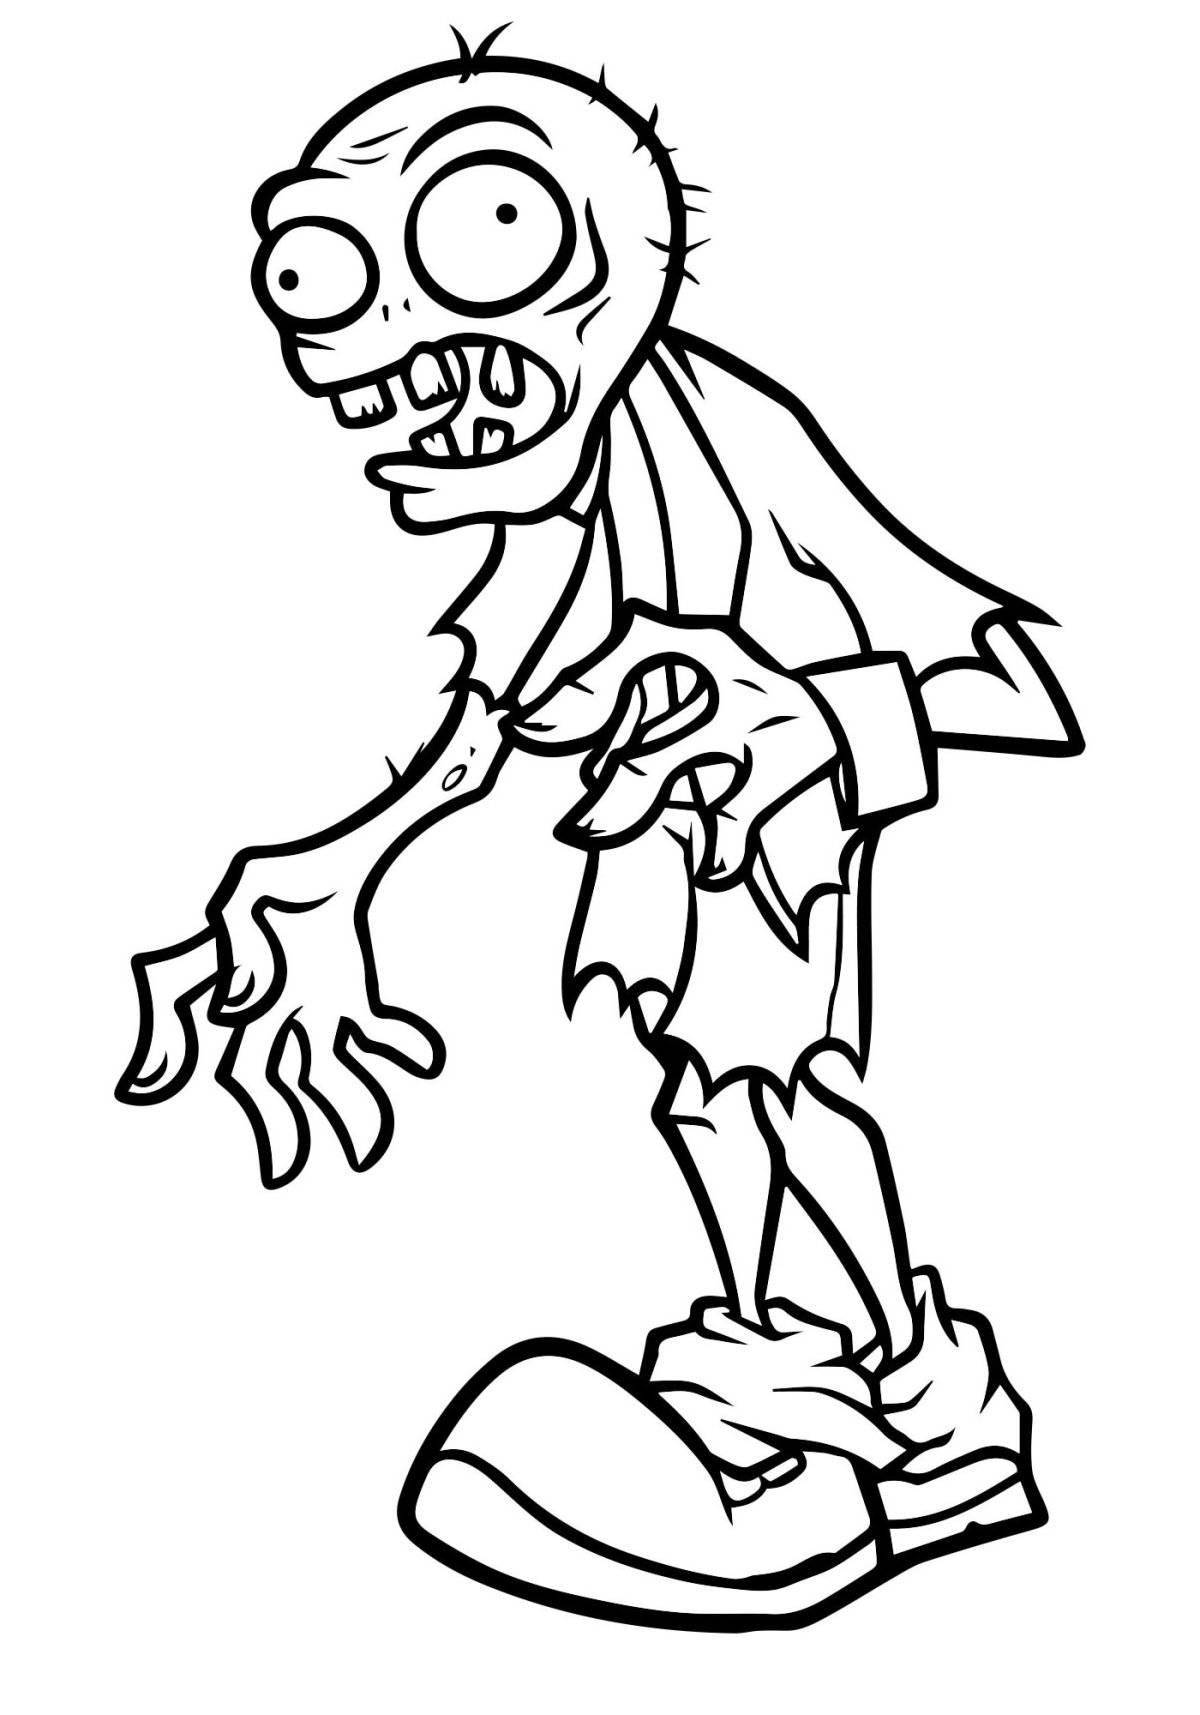 Ghast zombie mutant coloring page